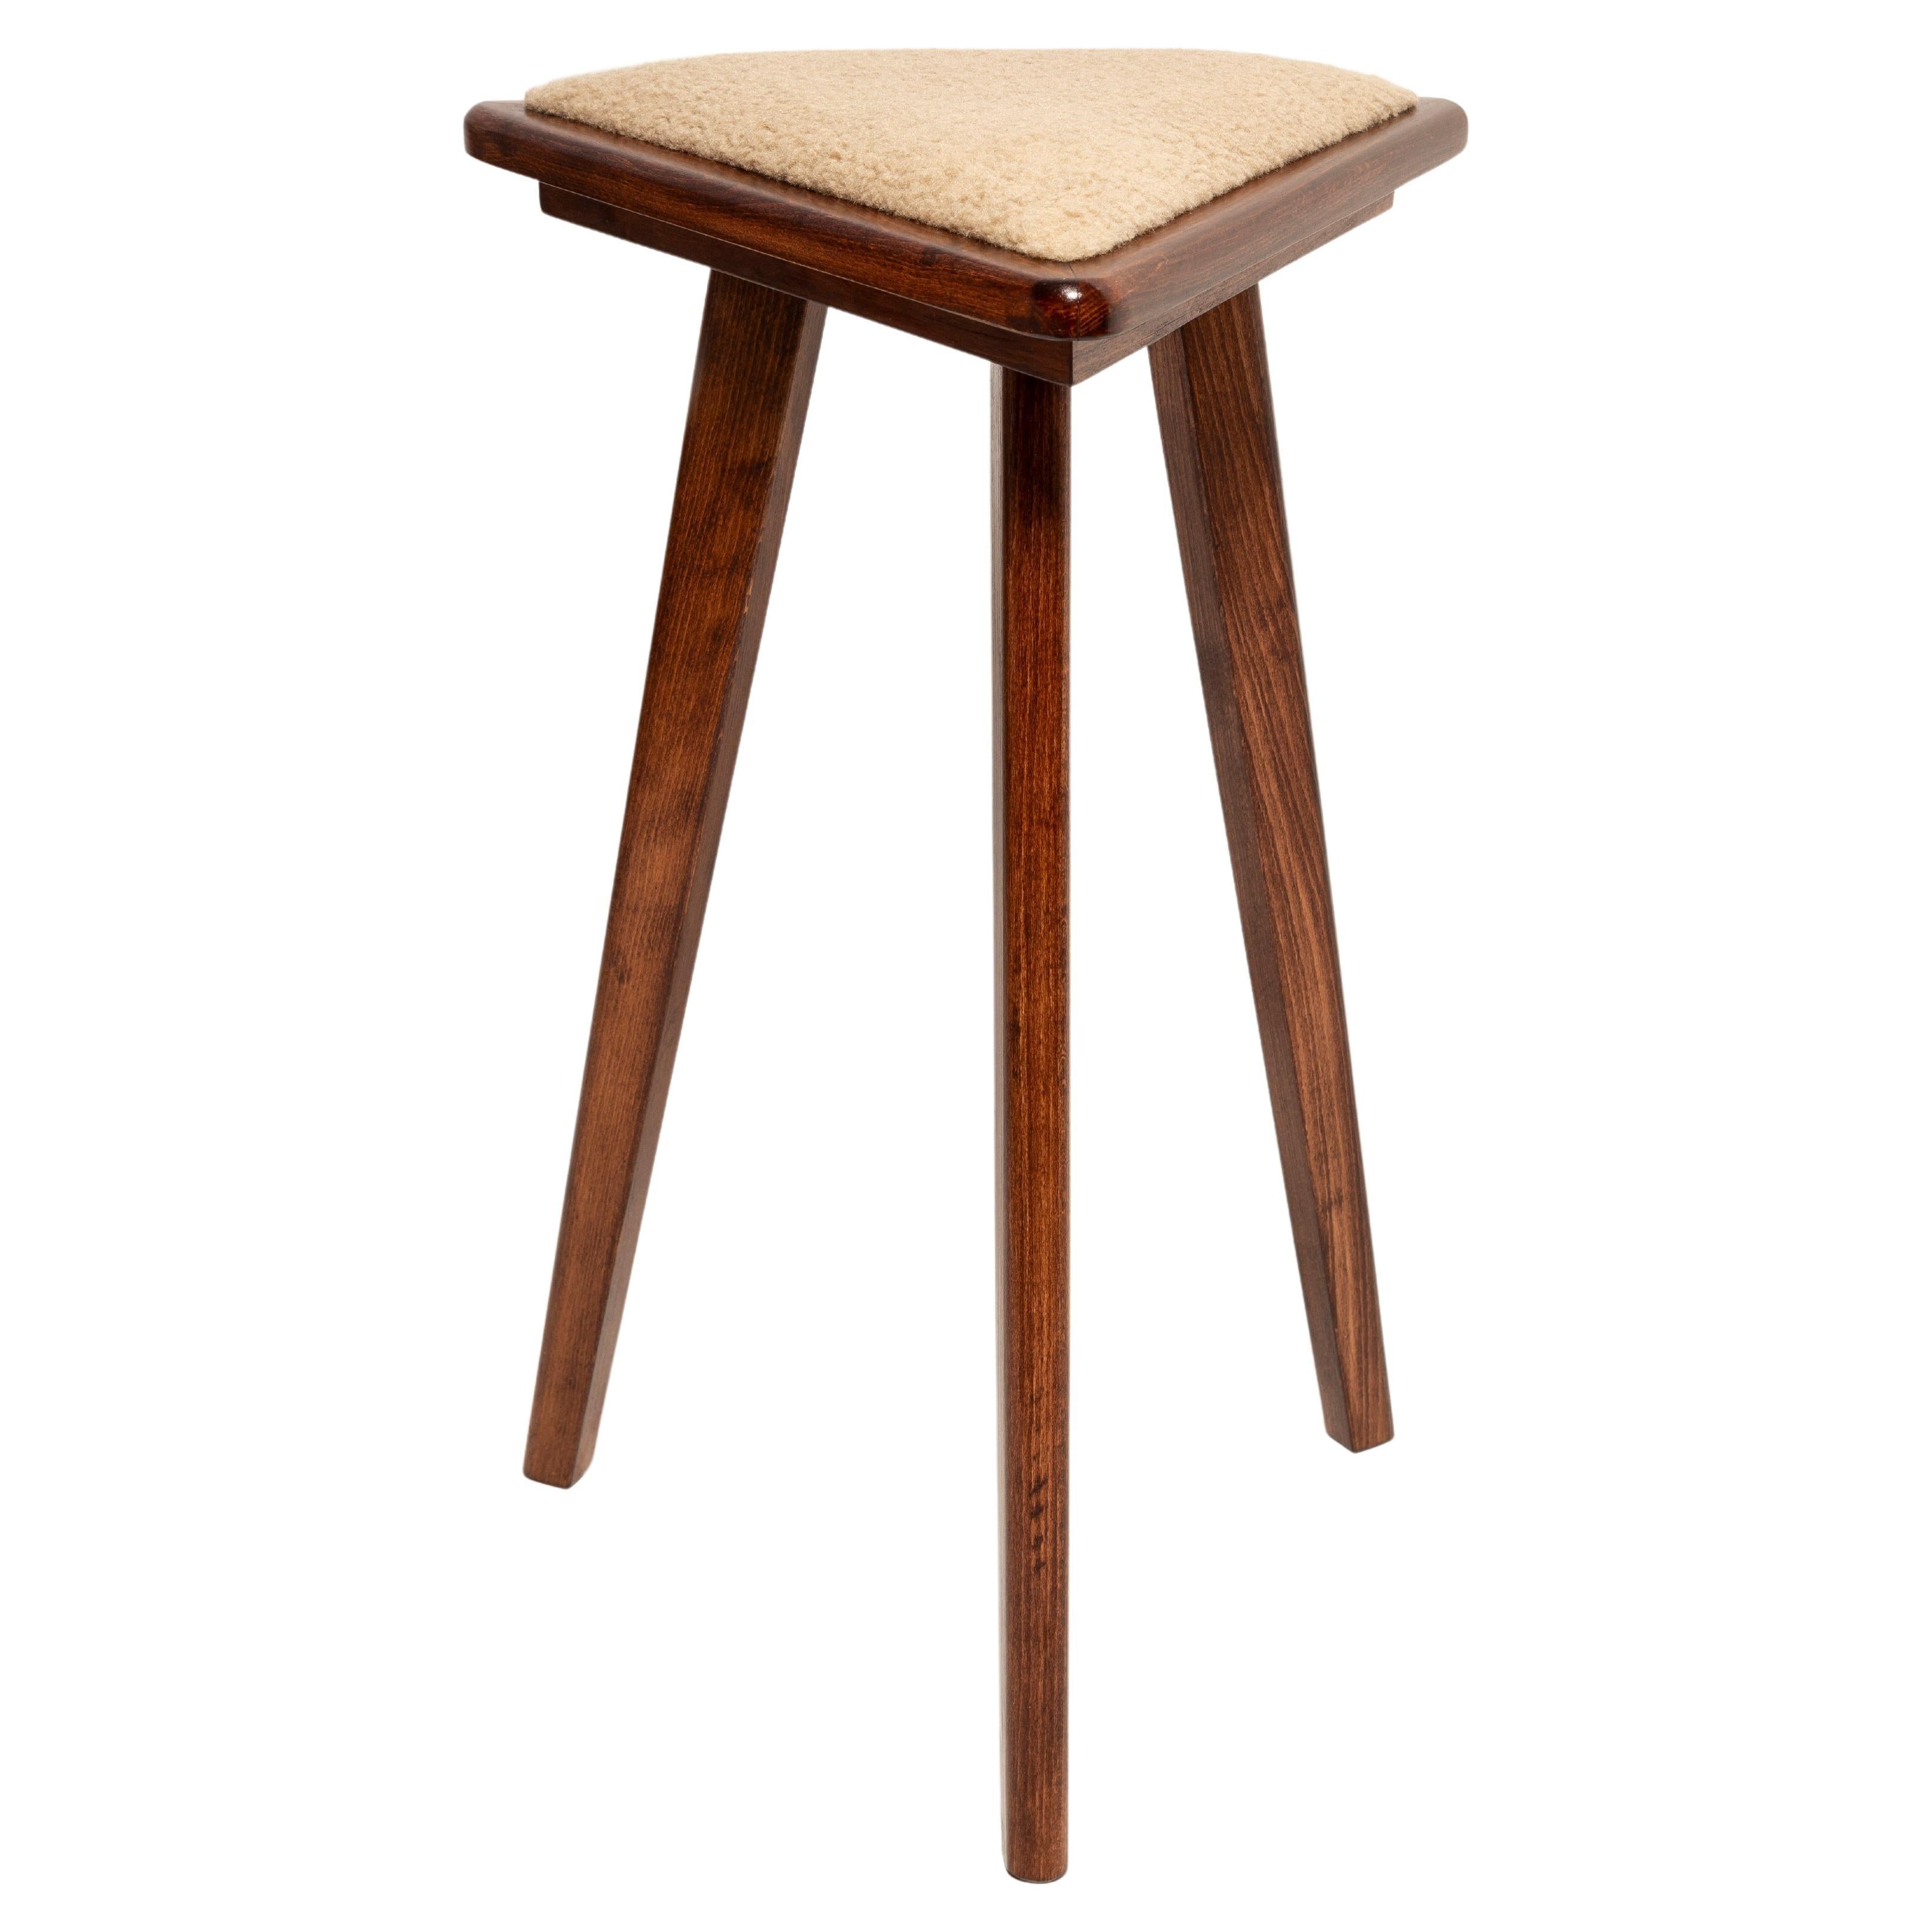 Mid-Century Style Camel Boucle Triangle Medium Stool, by Vintola Studio, Europe For Sale